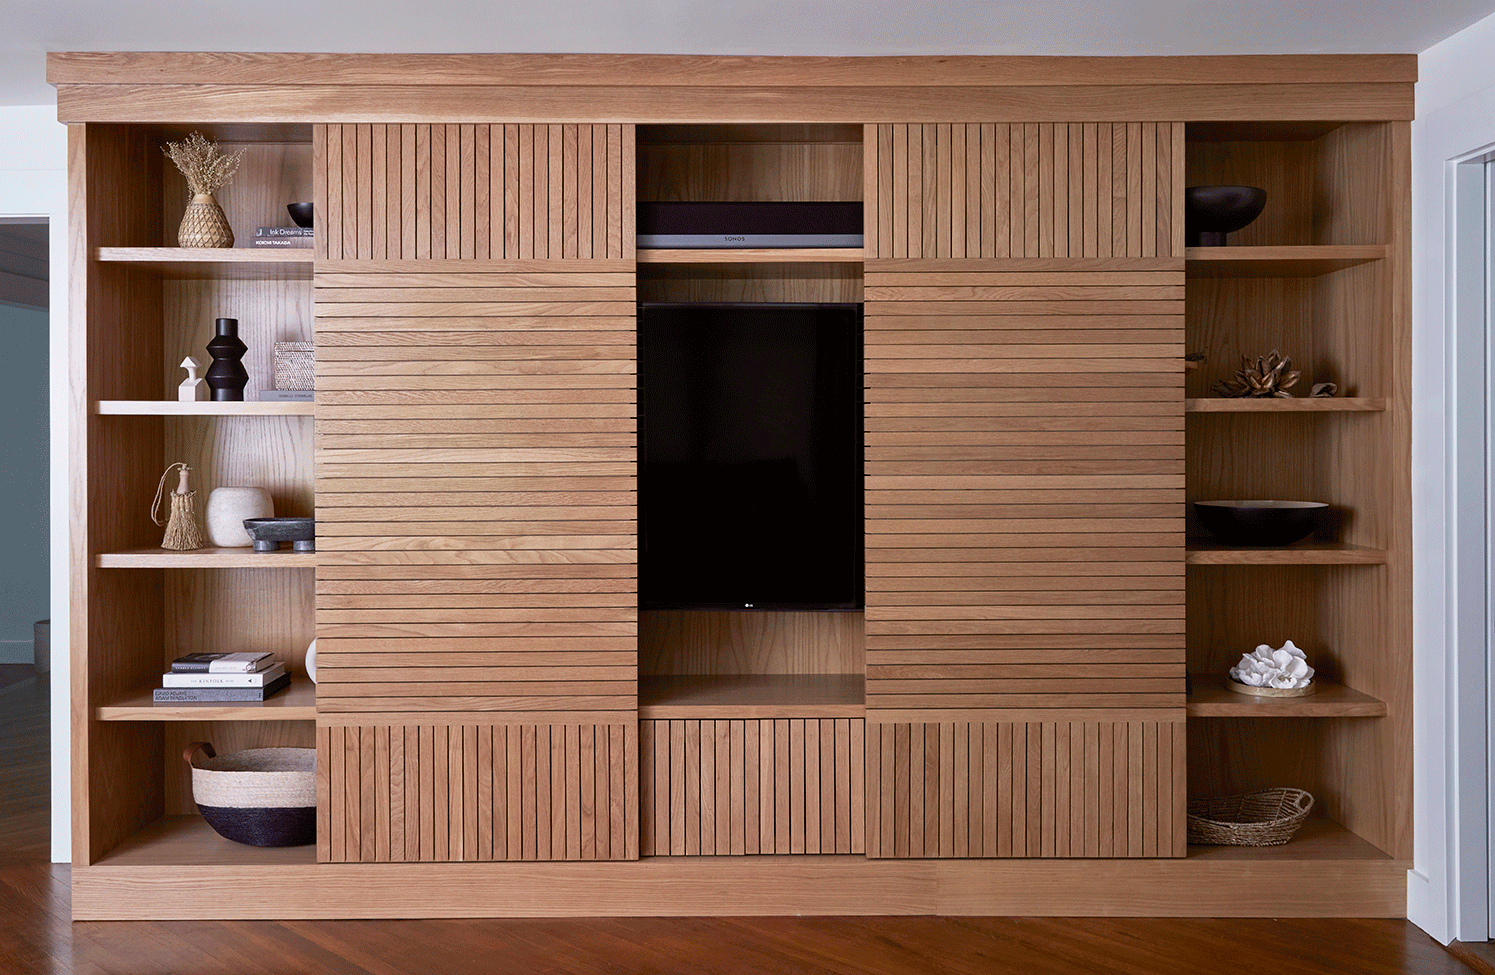 gif of wood slatted cabinet opening